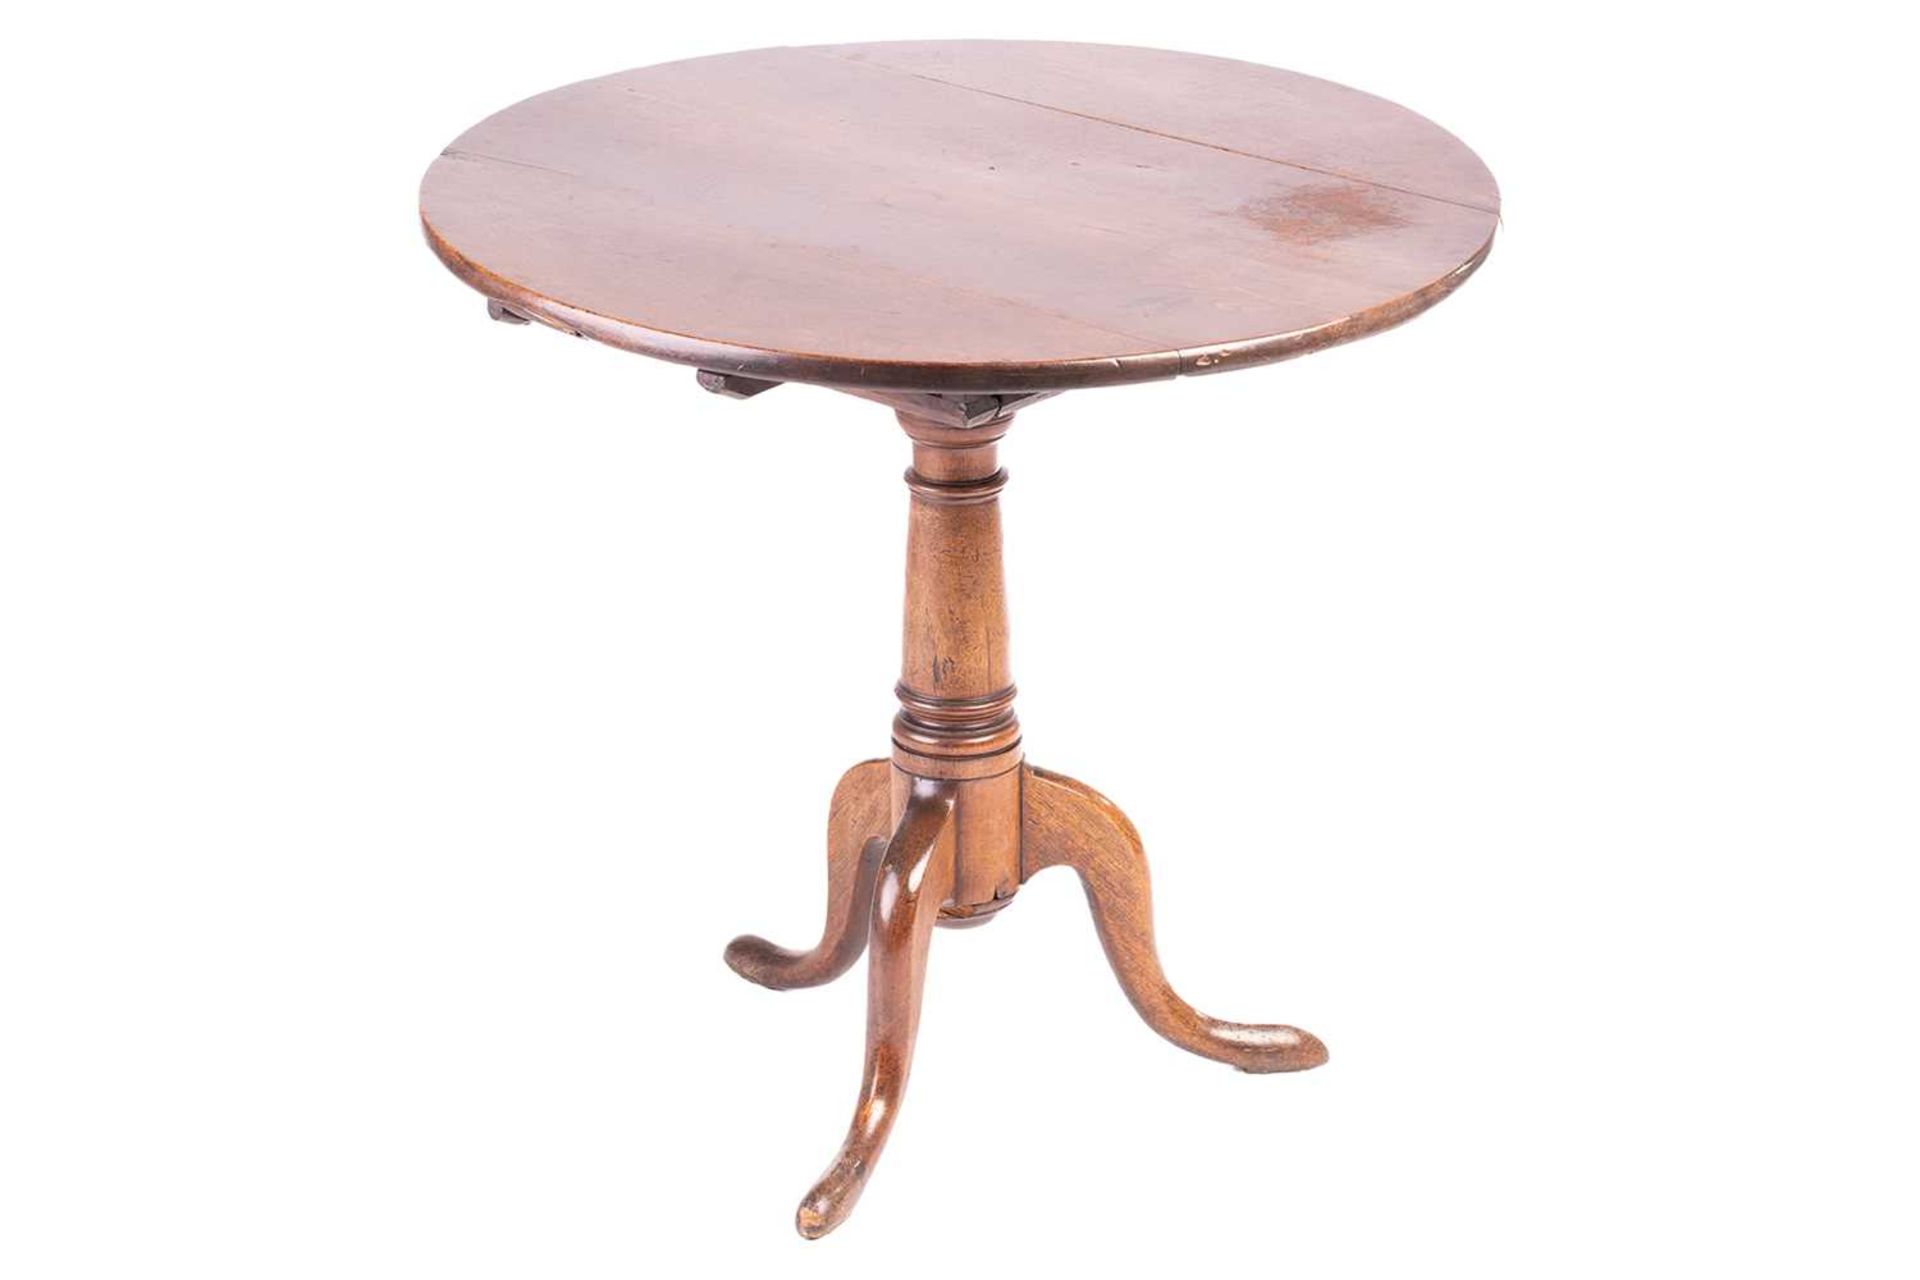 A 19th-century vernacular fruitwood snap-top tripod table, probably Welsh, with a planked top and bo - Image 3 of 5